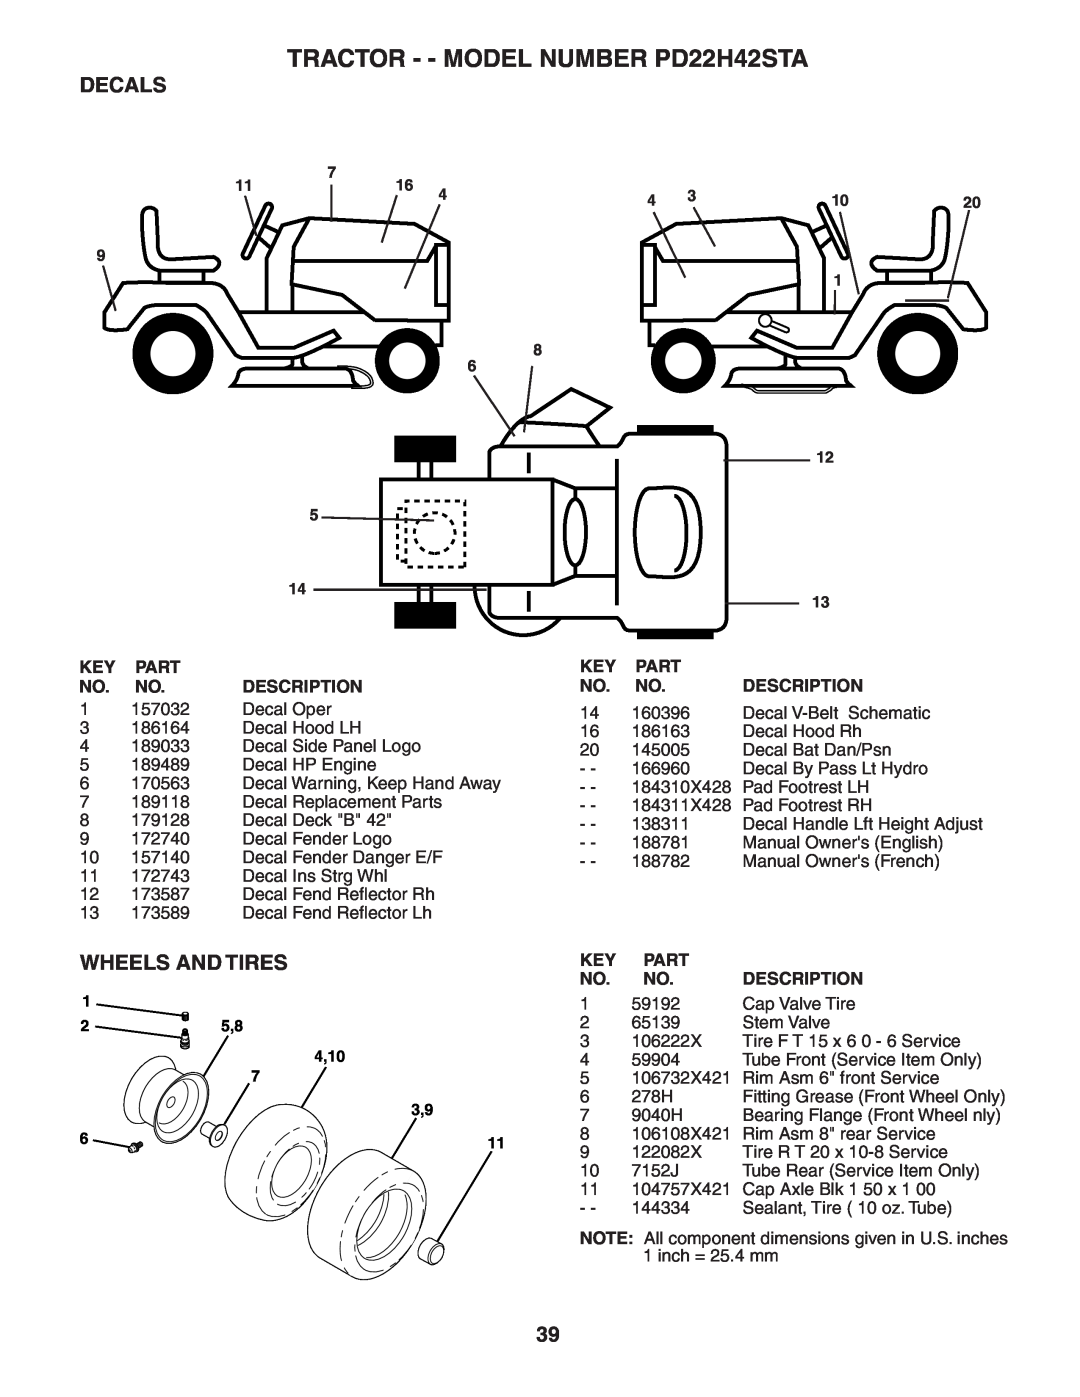 Poulan 188781 owner manual Decals, Wheels And Tires, TRACTOR - - MODEL NUMBER PD22H42STA, 25,8 4,10 